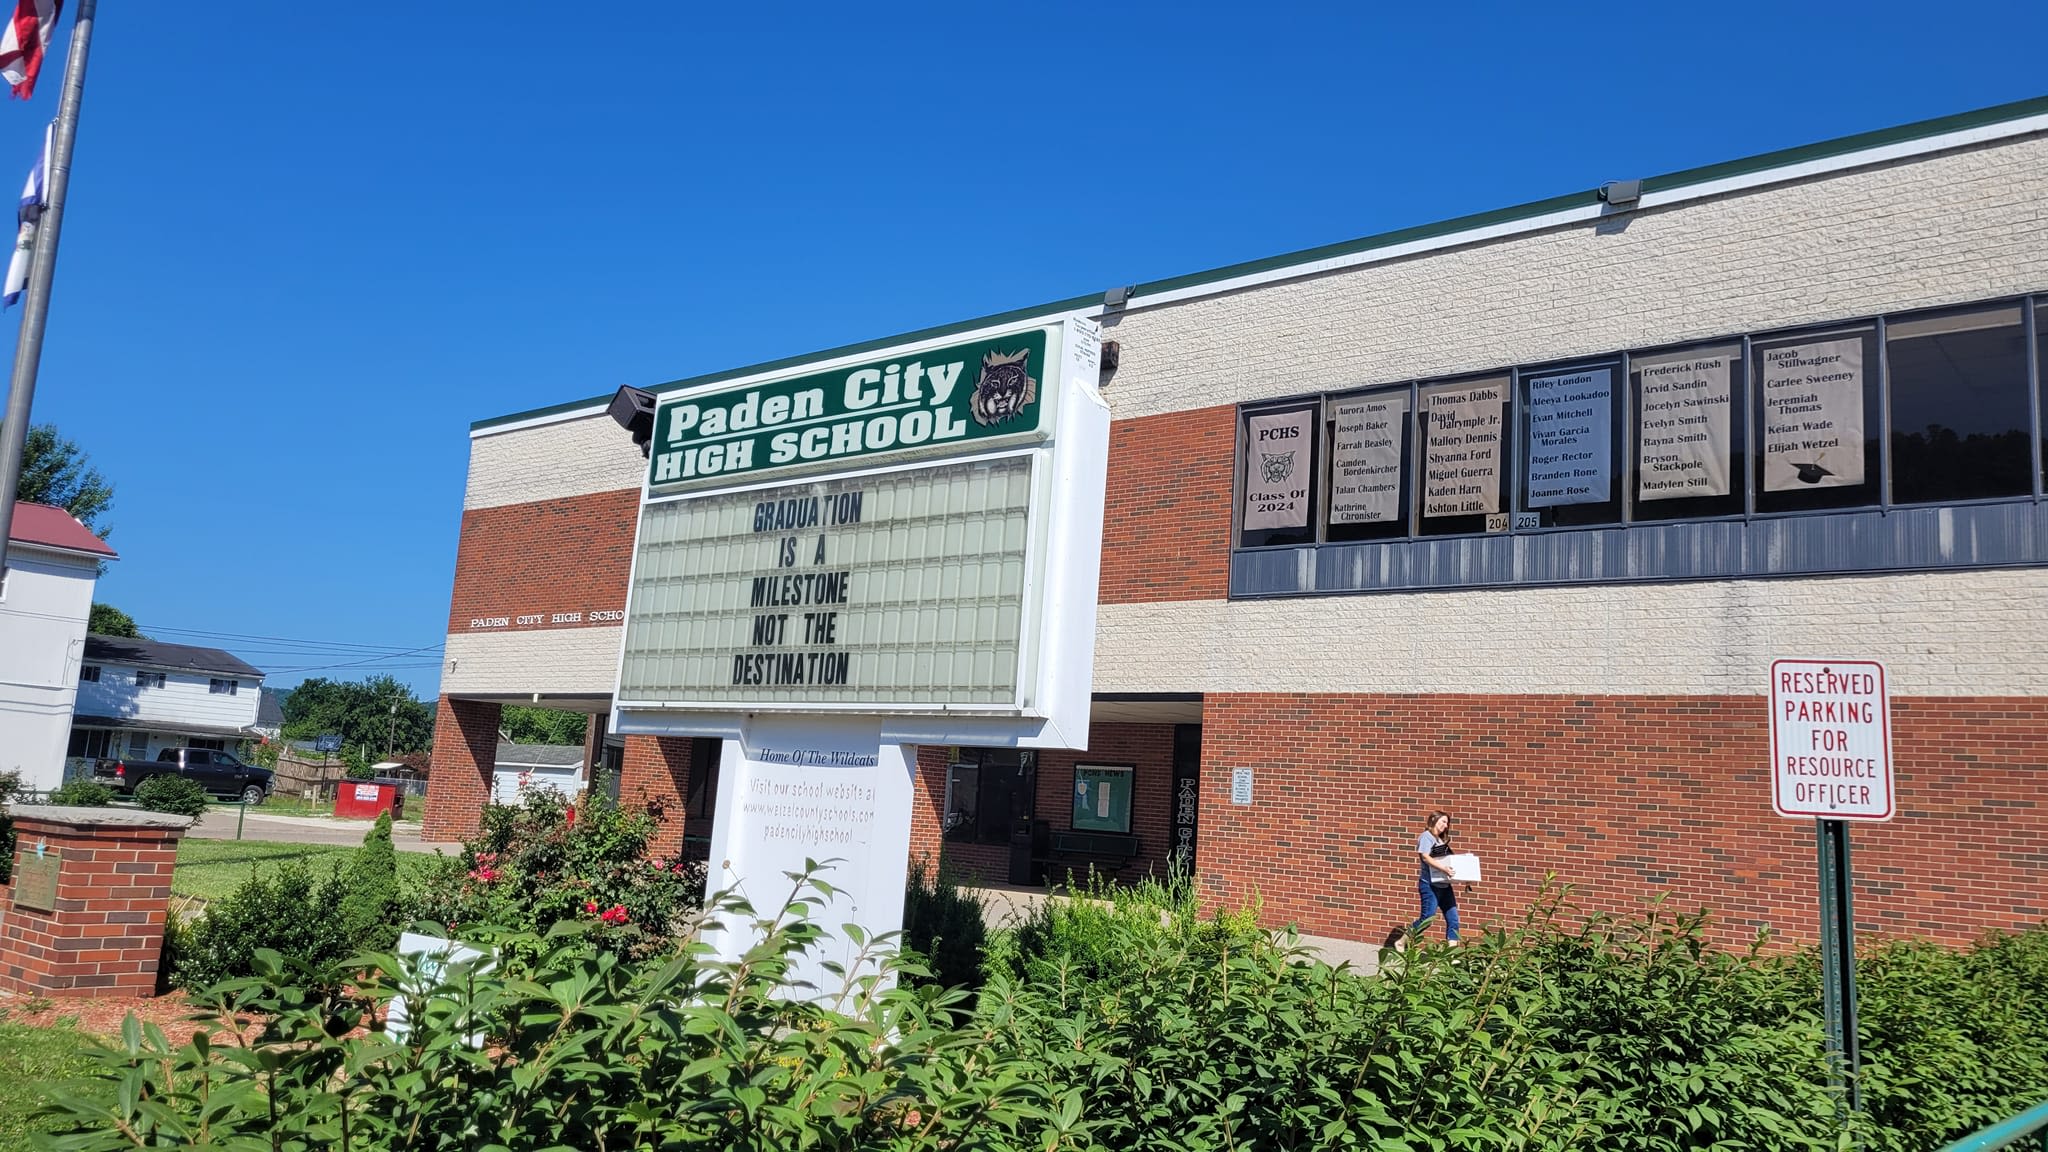 Paden City residents push back on plans to close their school; superintendent stands behind decision - WV MetroNews